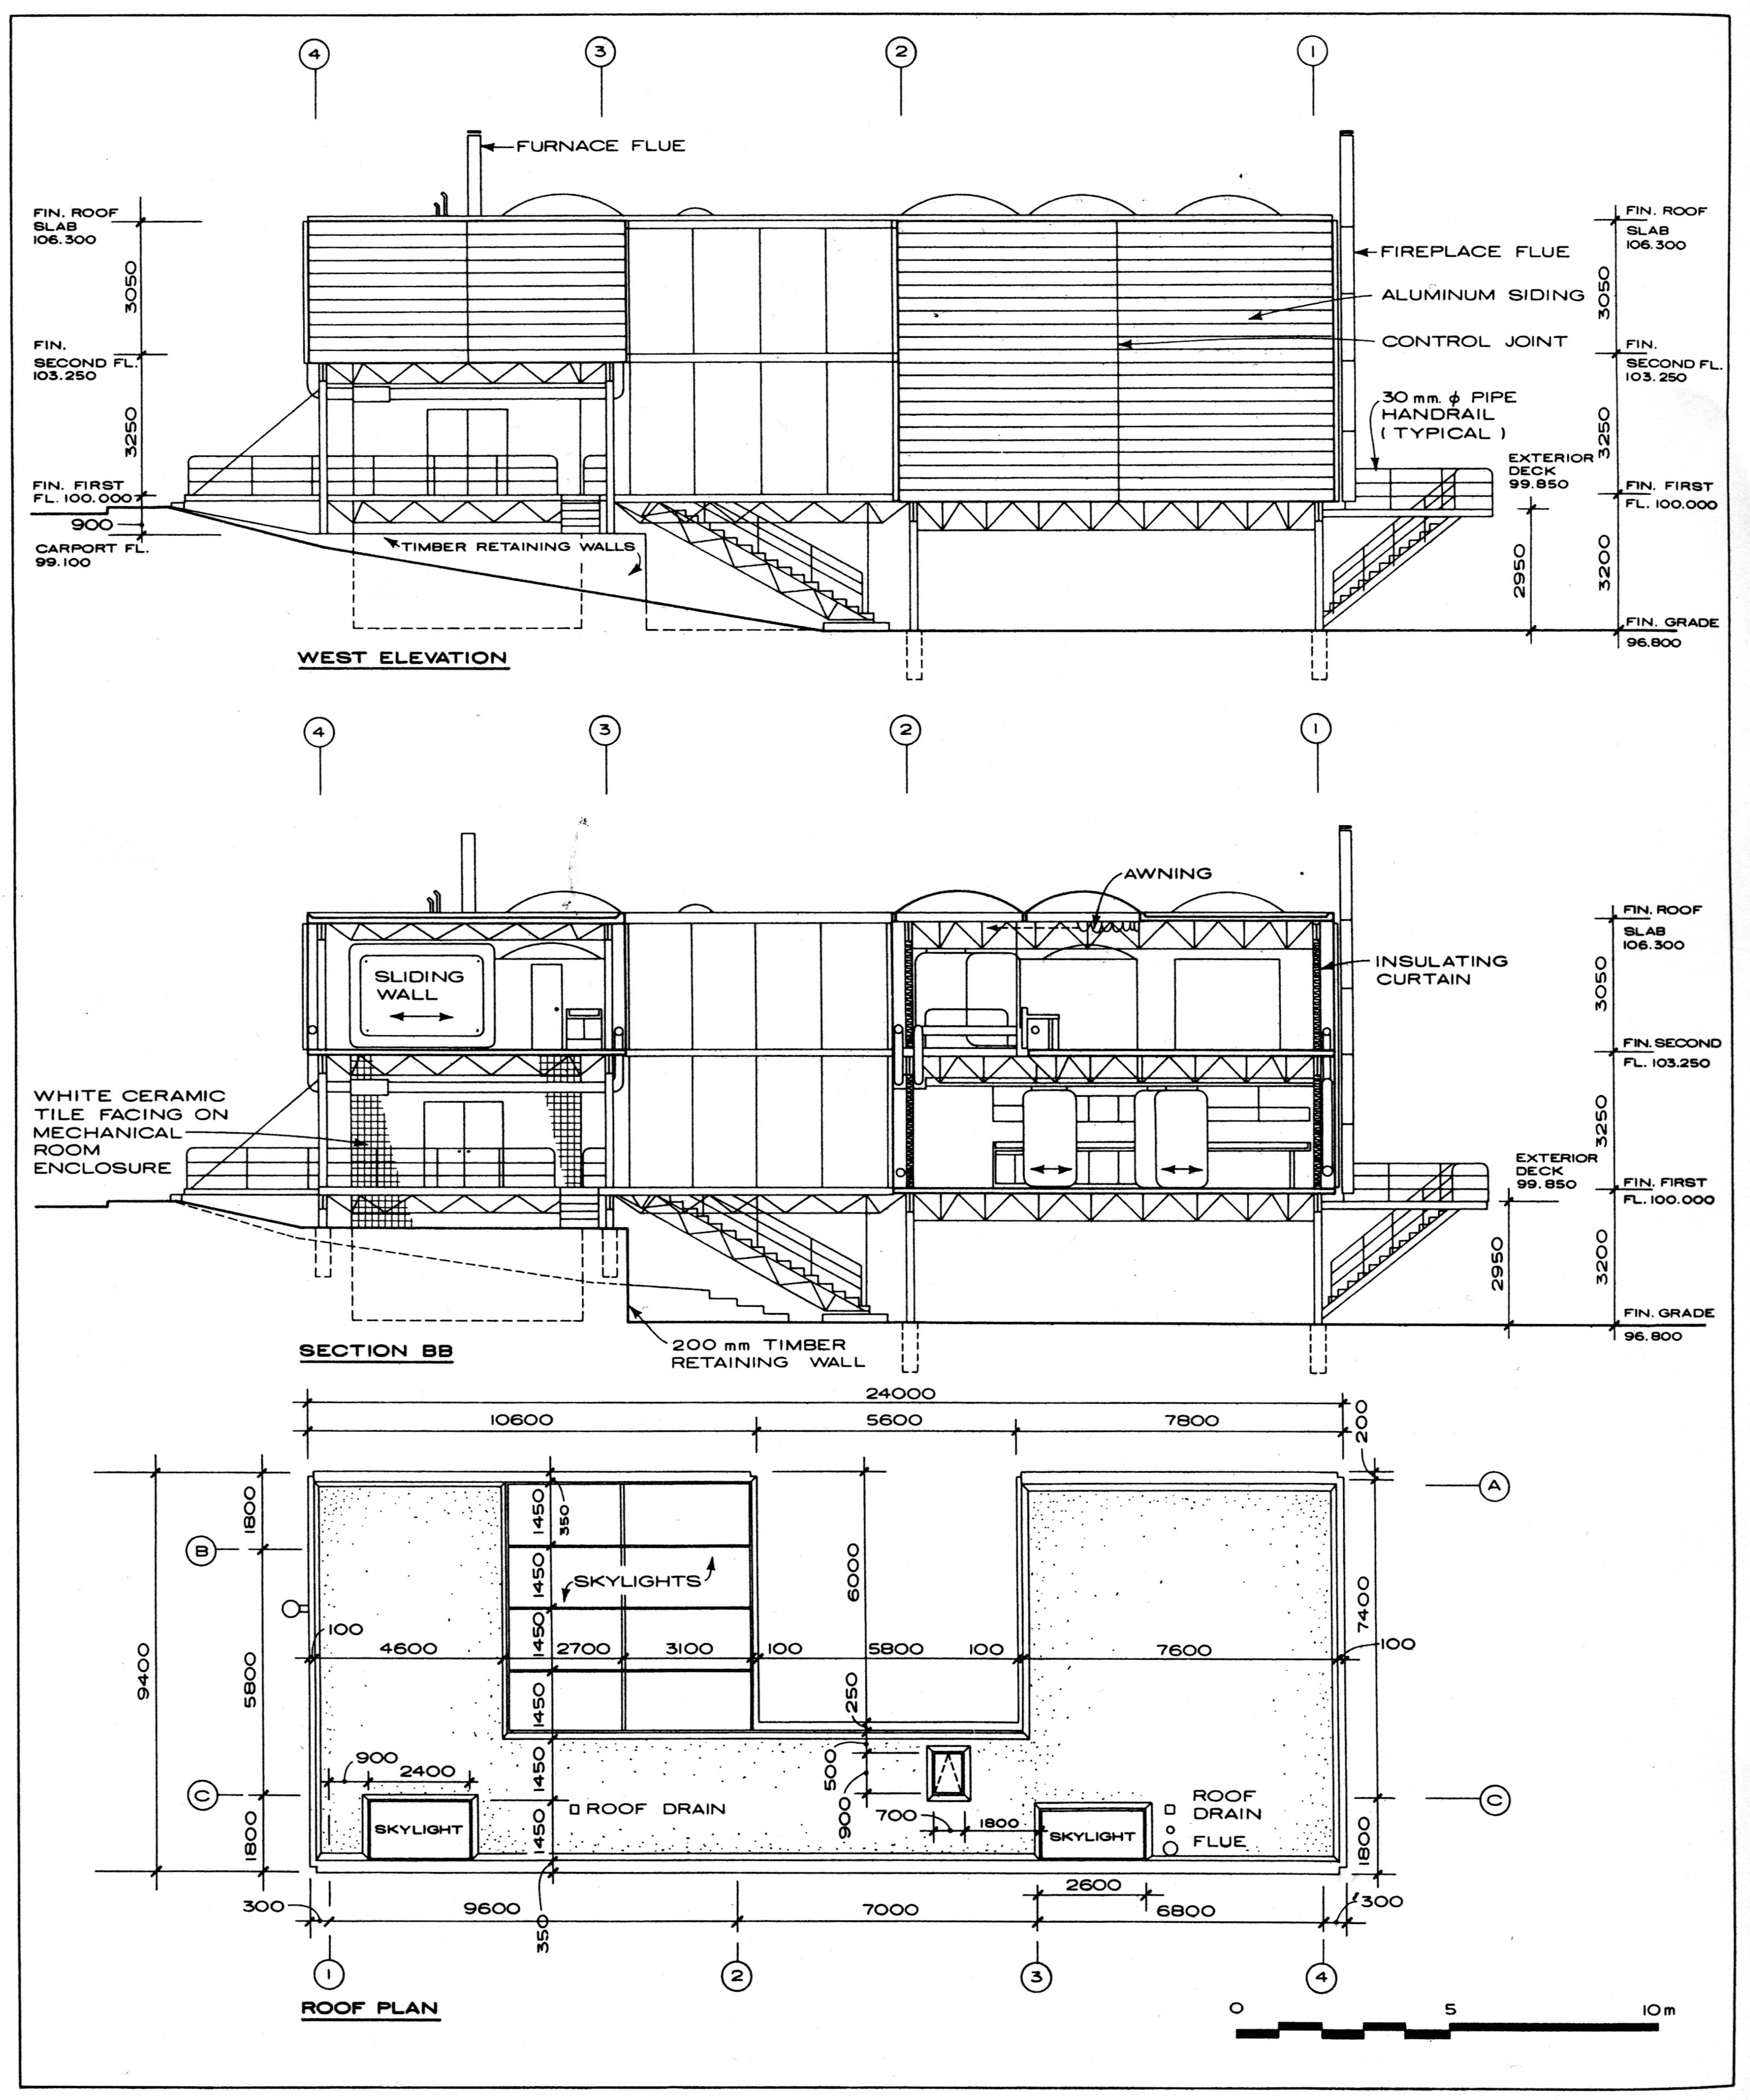 plans and elevations